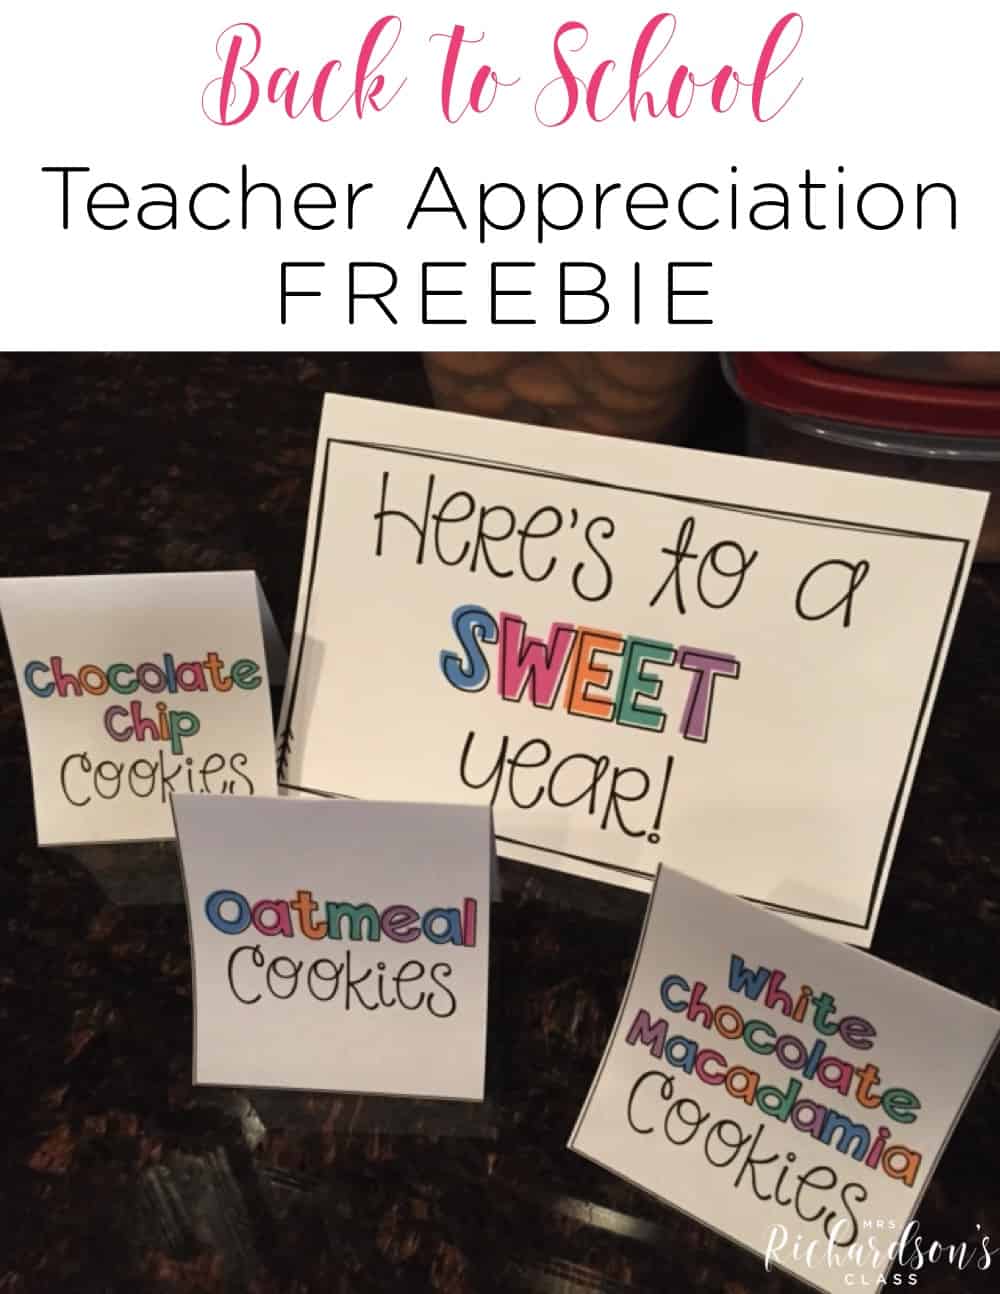 Back to school teacher appreciation idea for teachers during the first week of school! Grab the FREEBIE and spread some kindness! #backtoschool #teacherappreciation #FREEBIE #free #printable